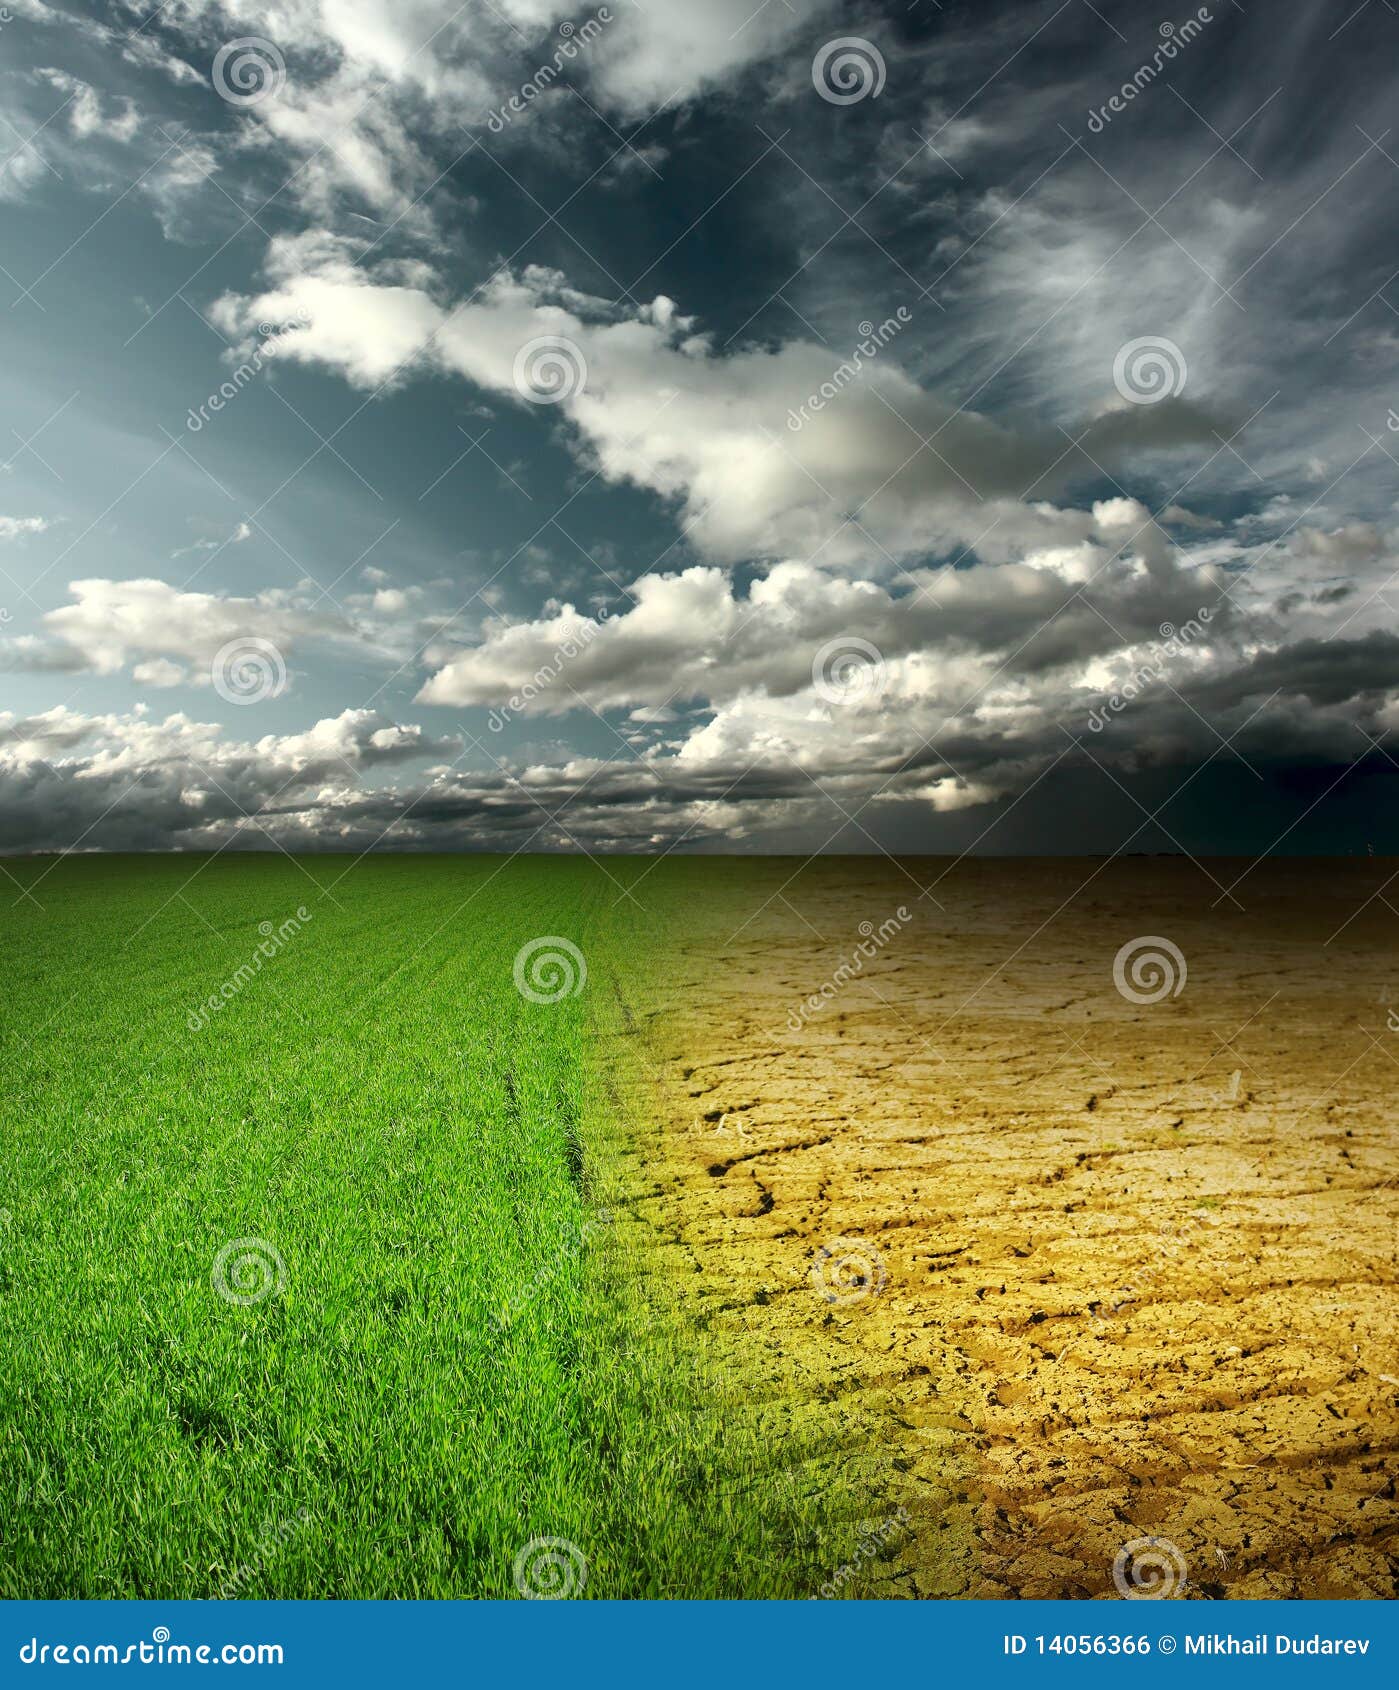 Weather. Green meadow and cracked desert land under storm clouds